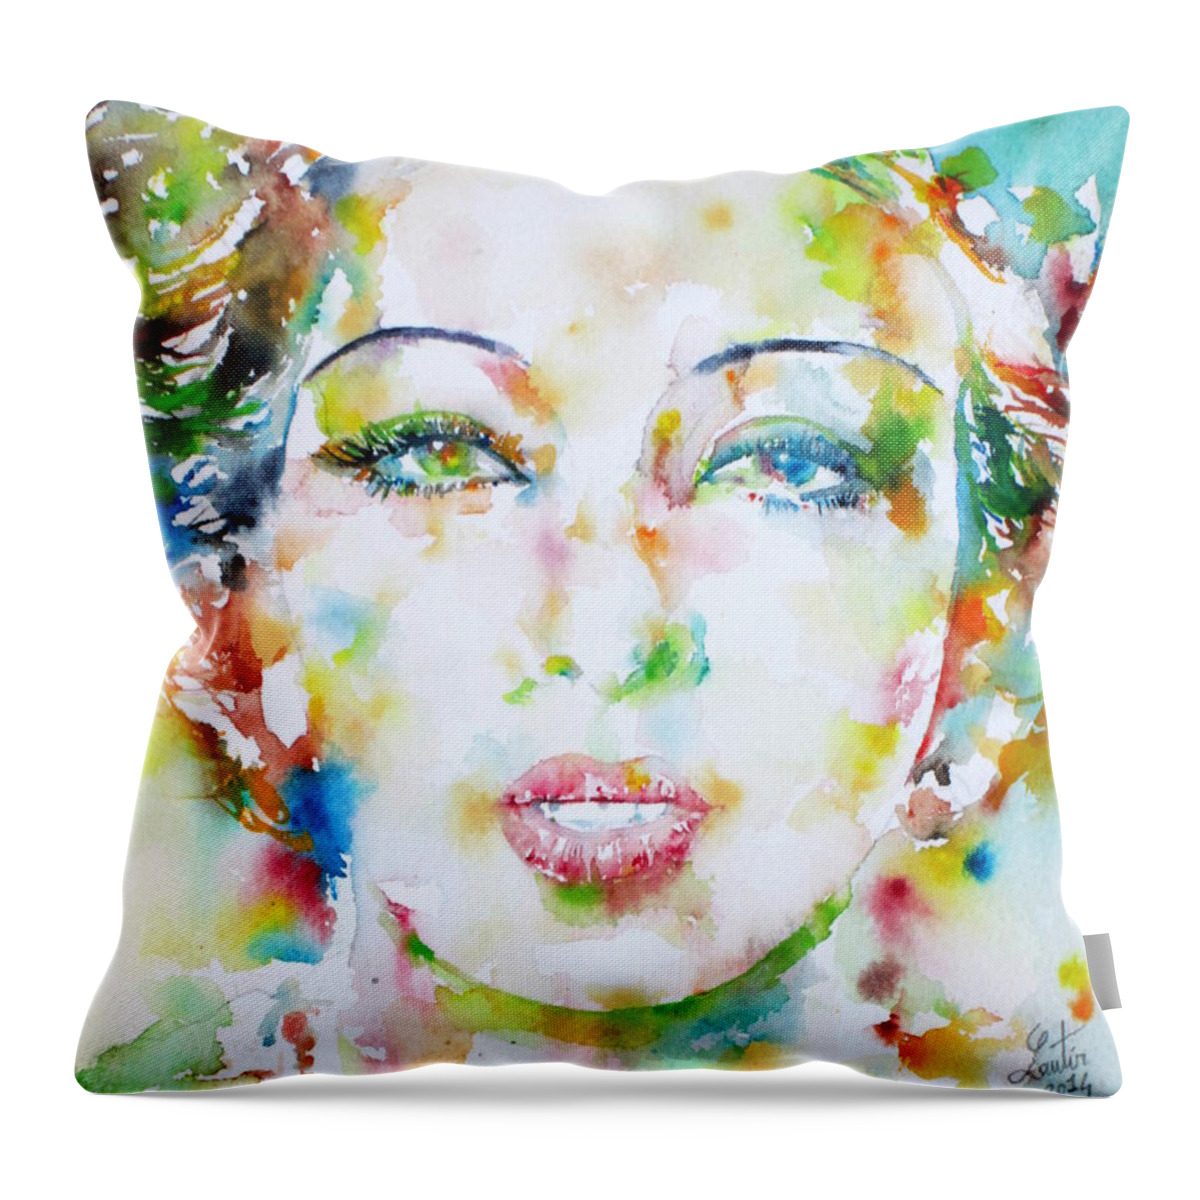 Josephine Baker Throw Pillow featuring the painting JOSEPHINE BAKER - watercolor portrait by Fabrizio Cassetta